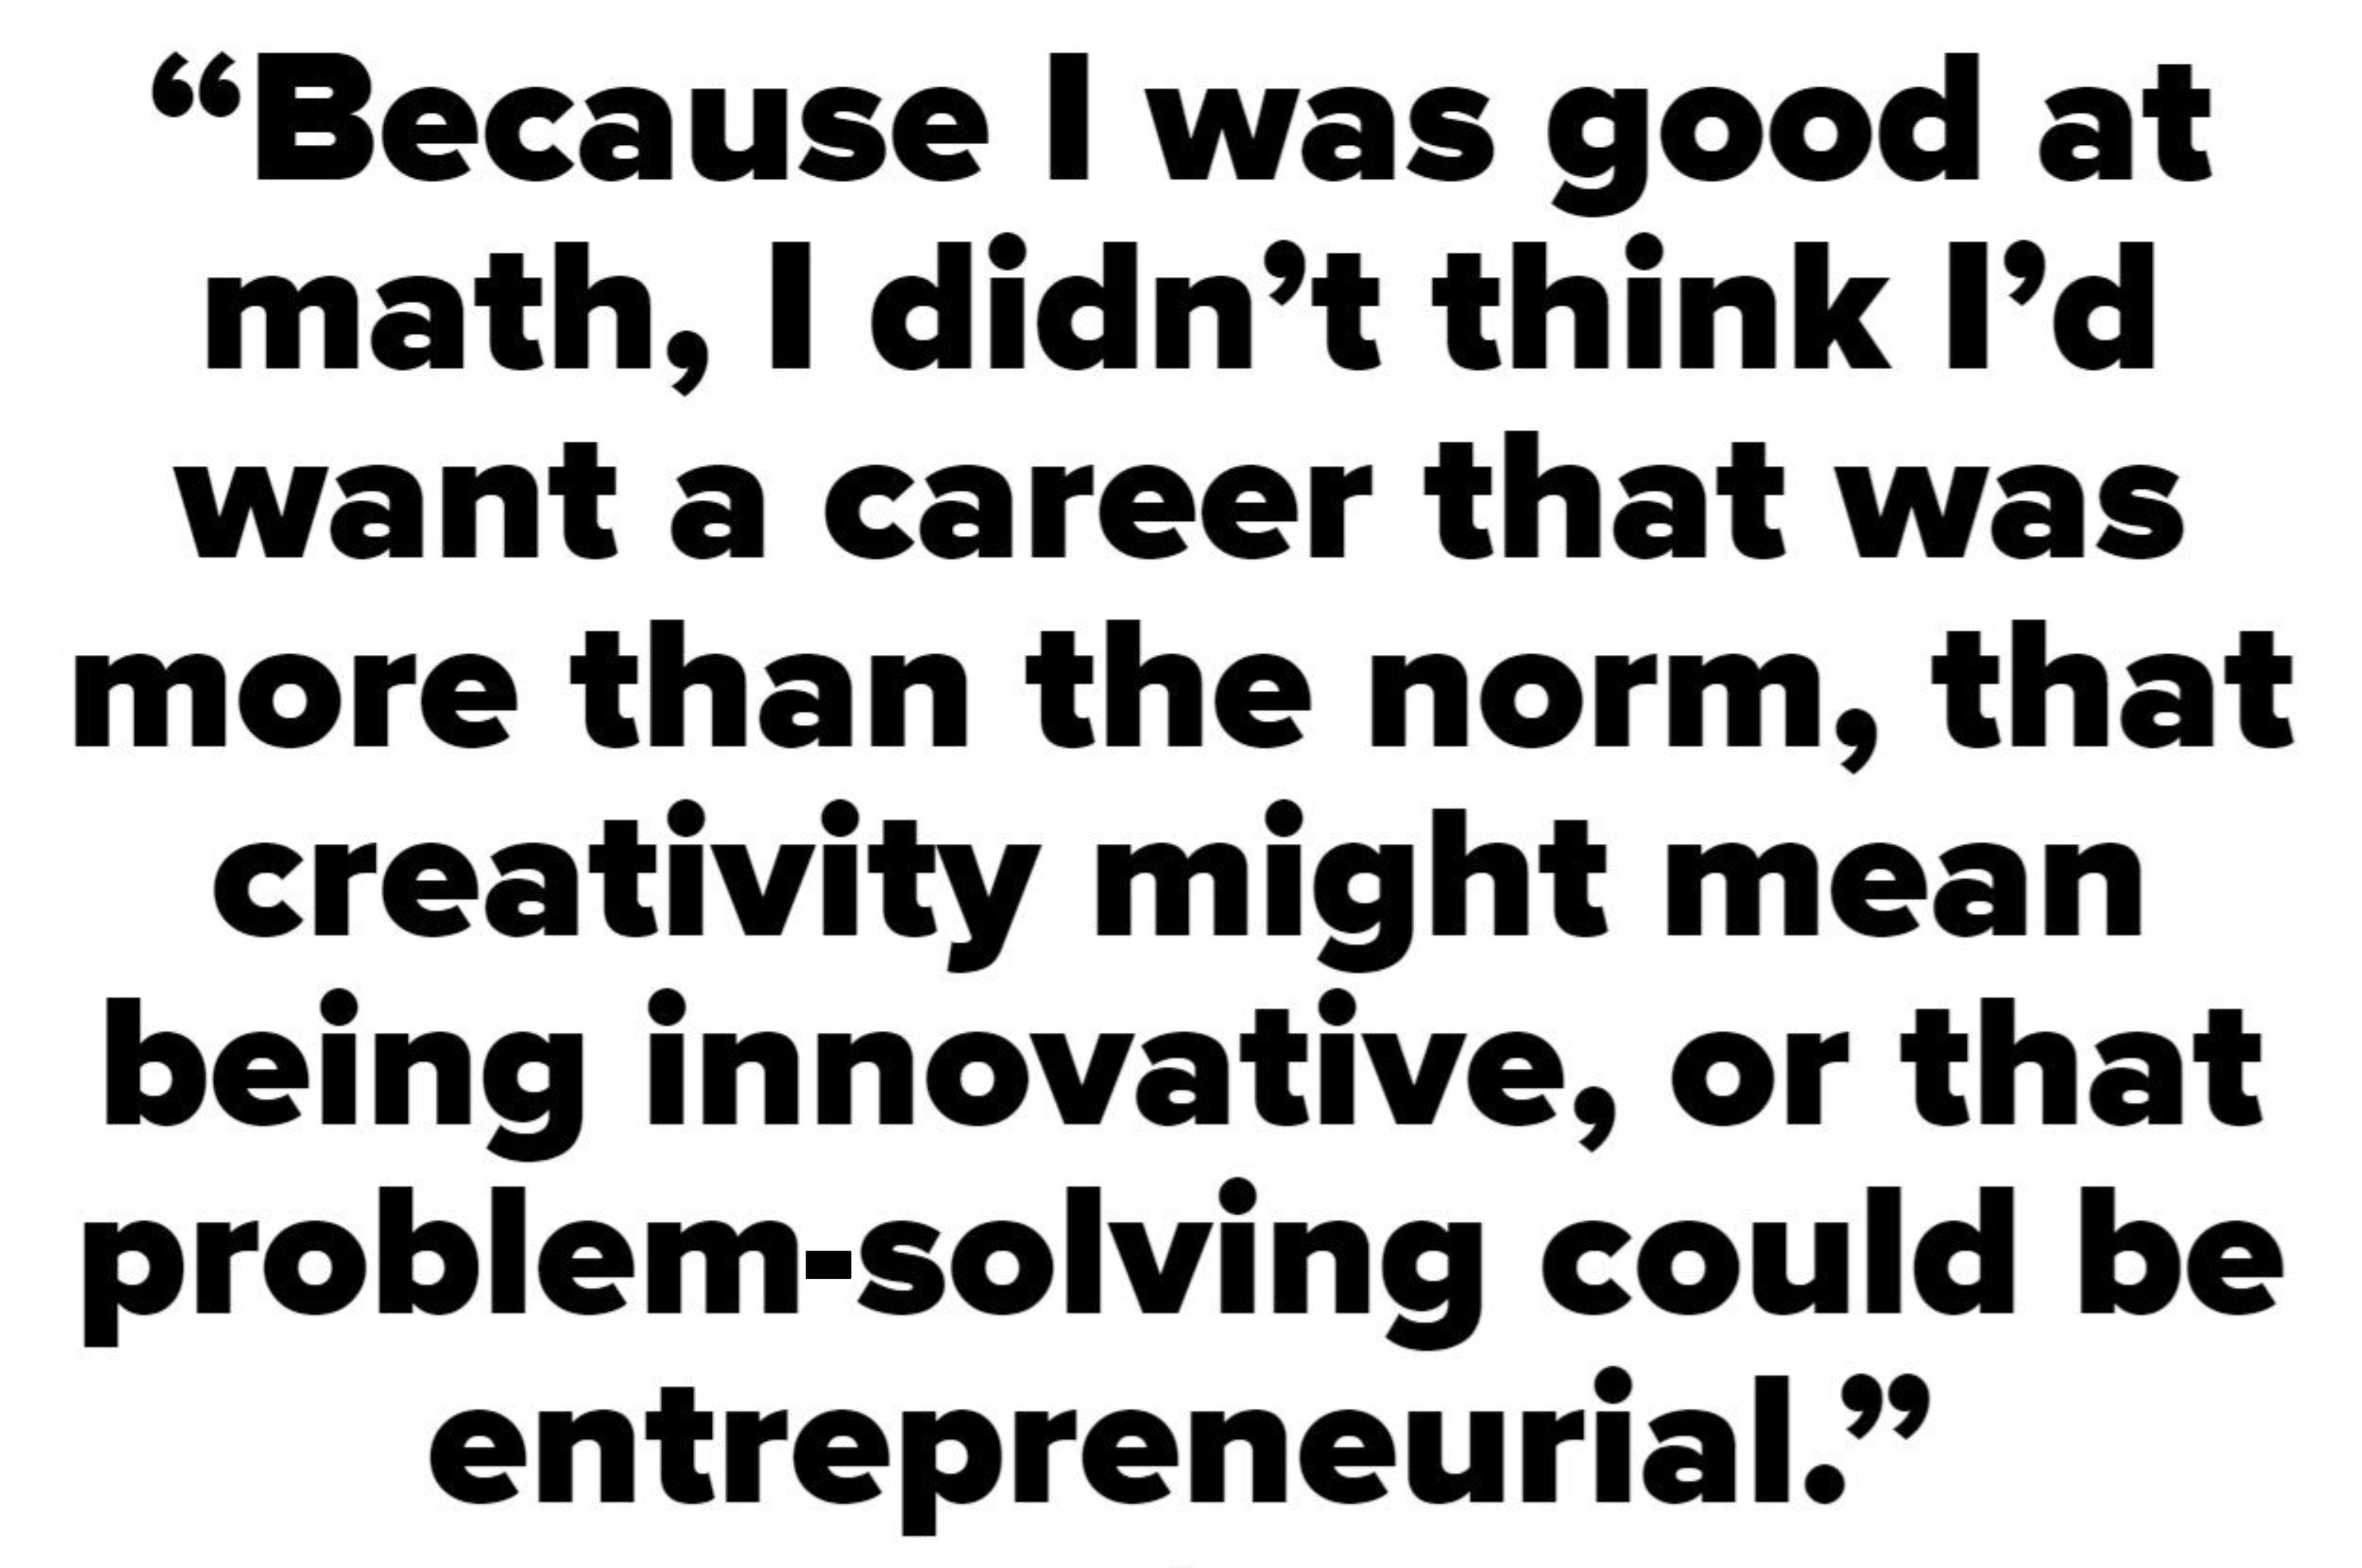 Because I was good at math, I didn&#x27;t think I&#x27;d want a career that was more than the norm, that creativity might mean being innovative, or that problem-solving could be entrepreneurial